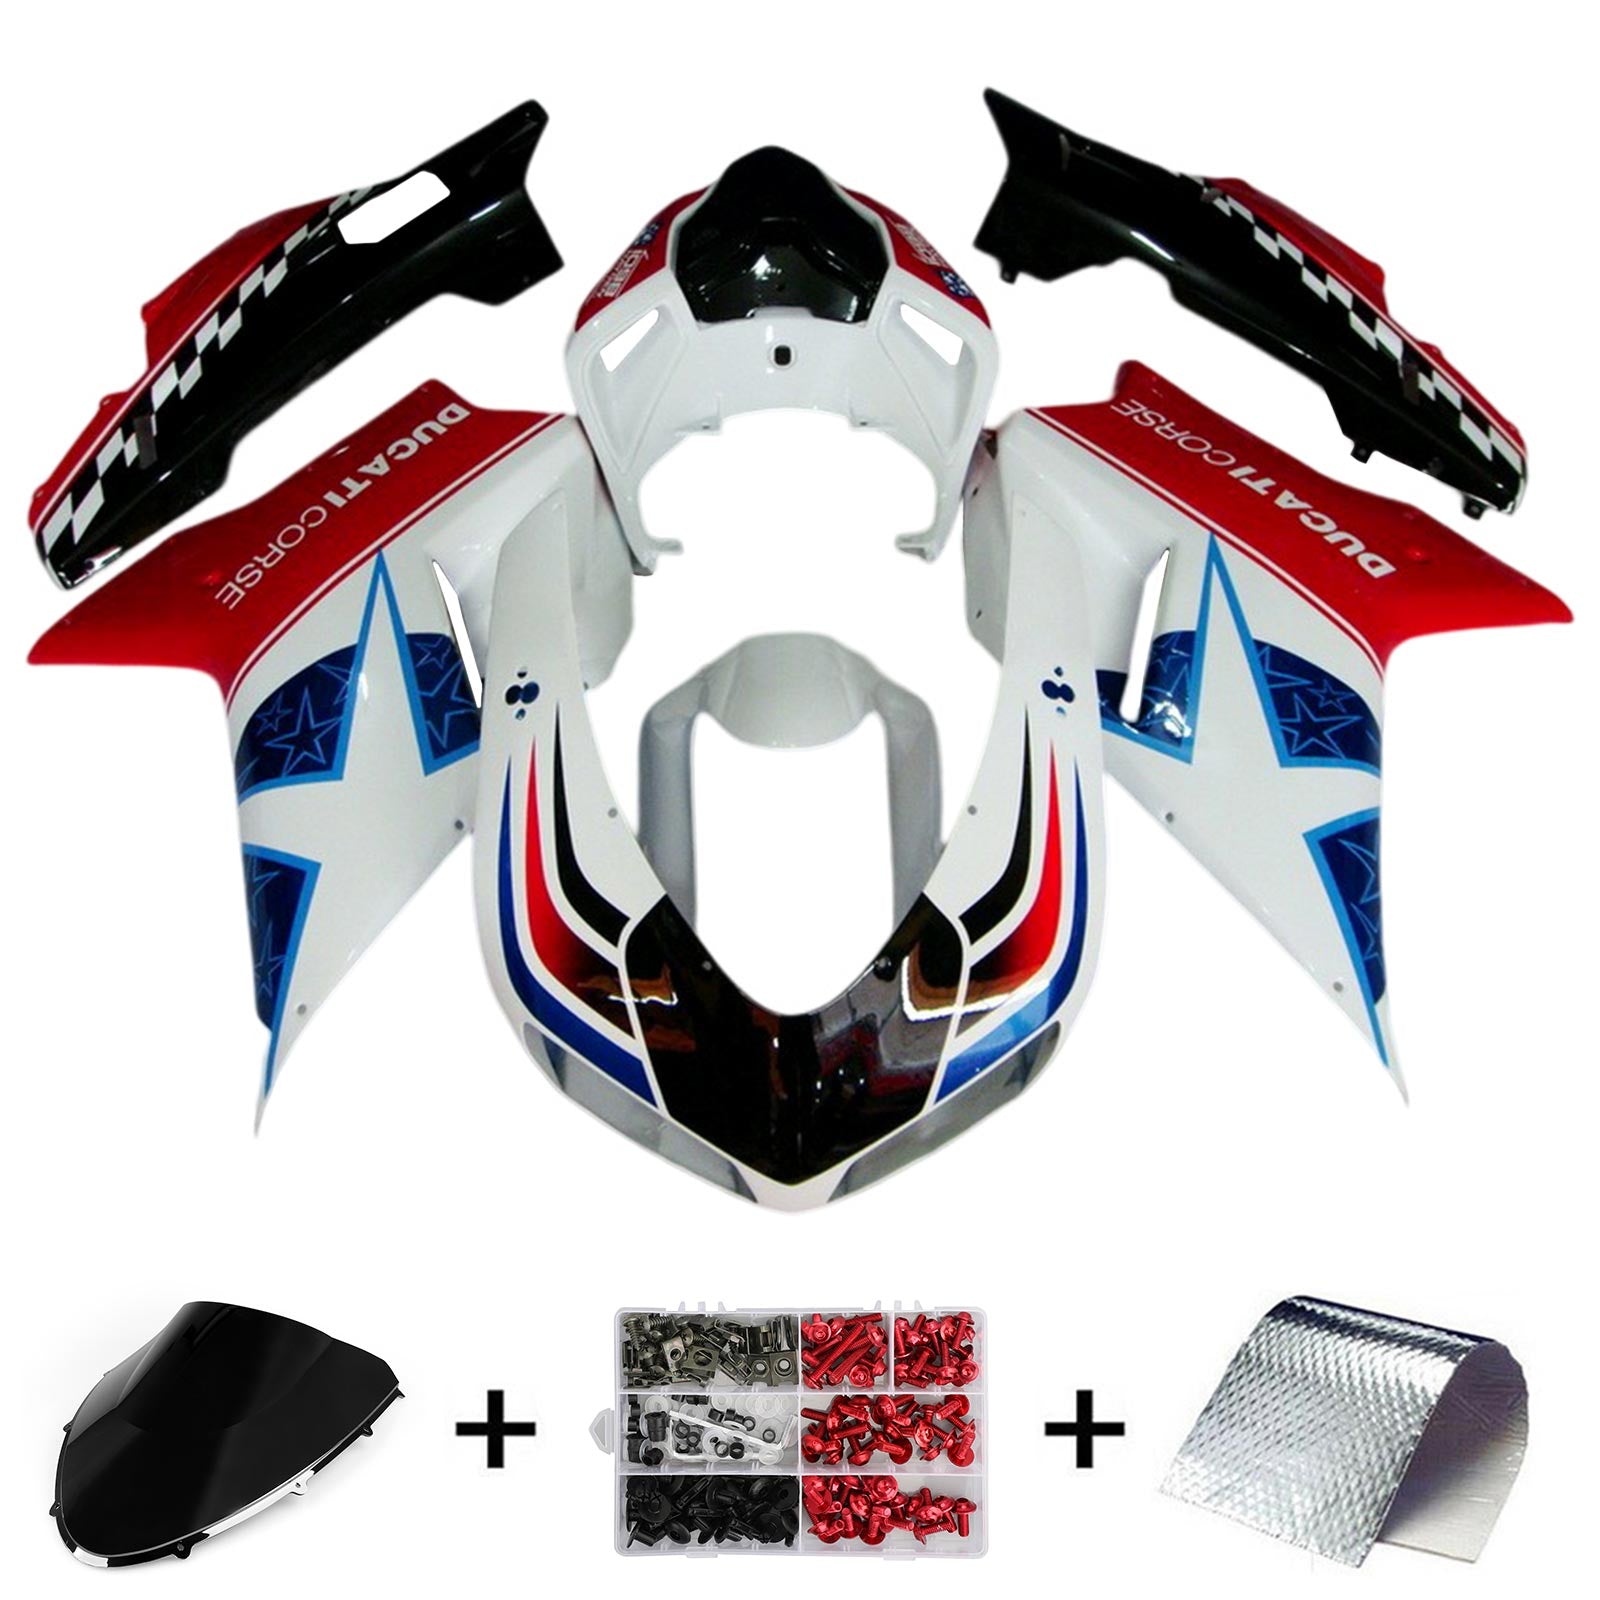 Amotopart All Years Ducati 1098 1198 848 Red&Blue Style1 Fairing Kit